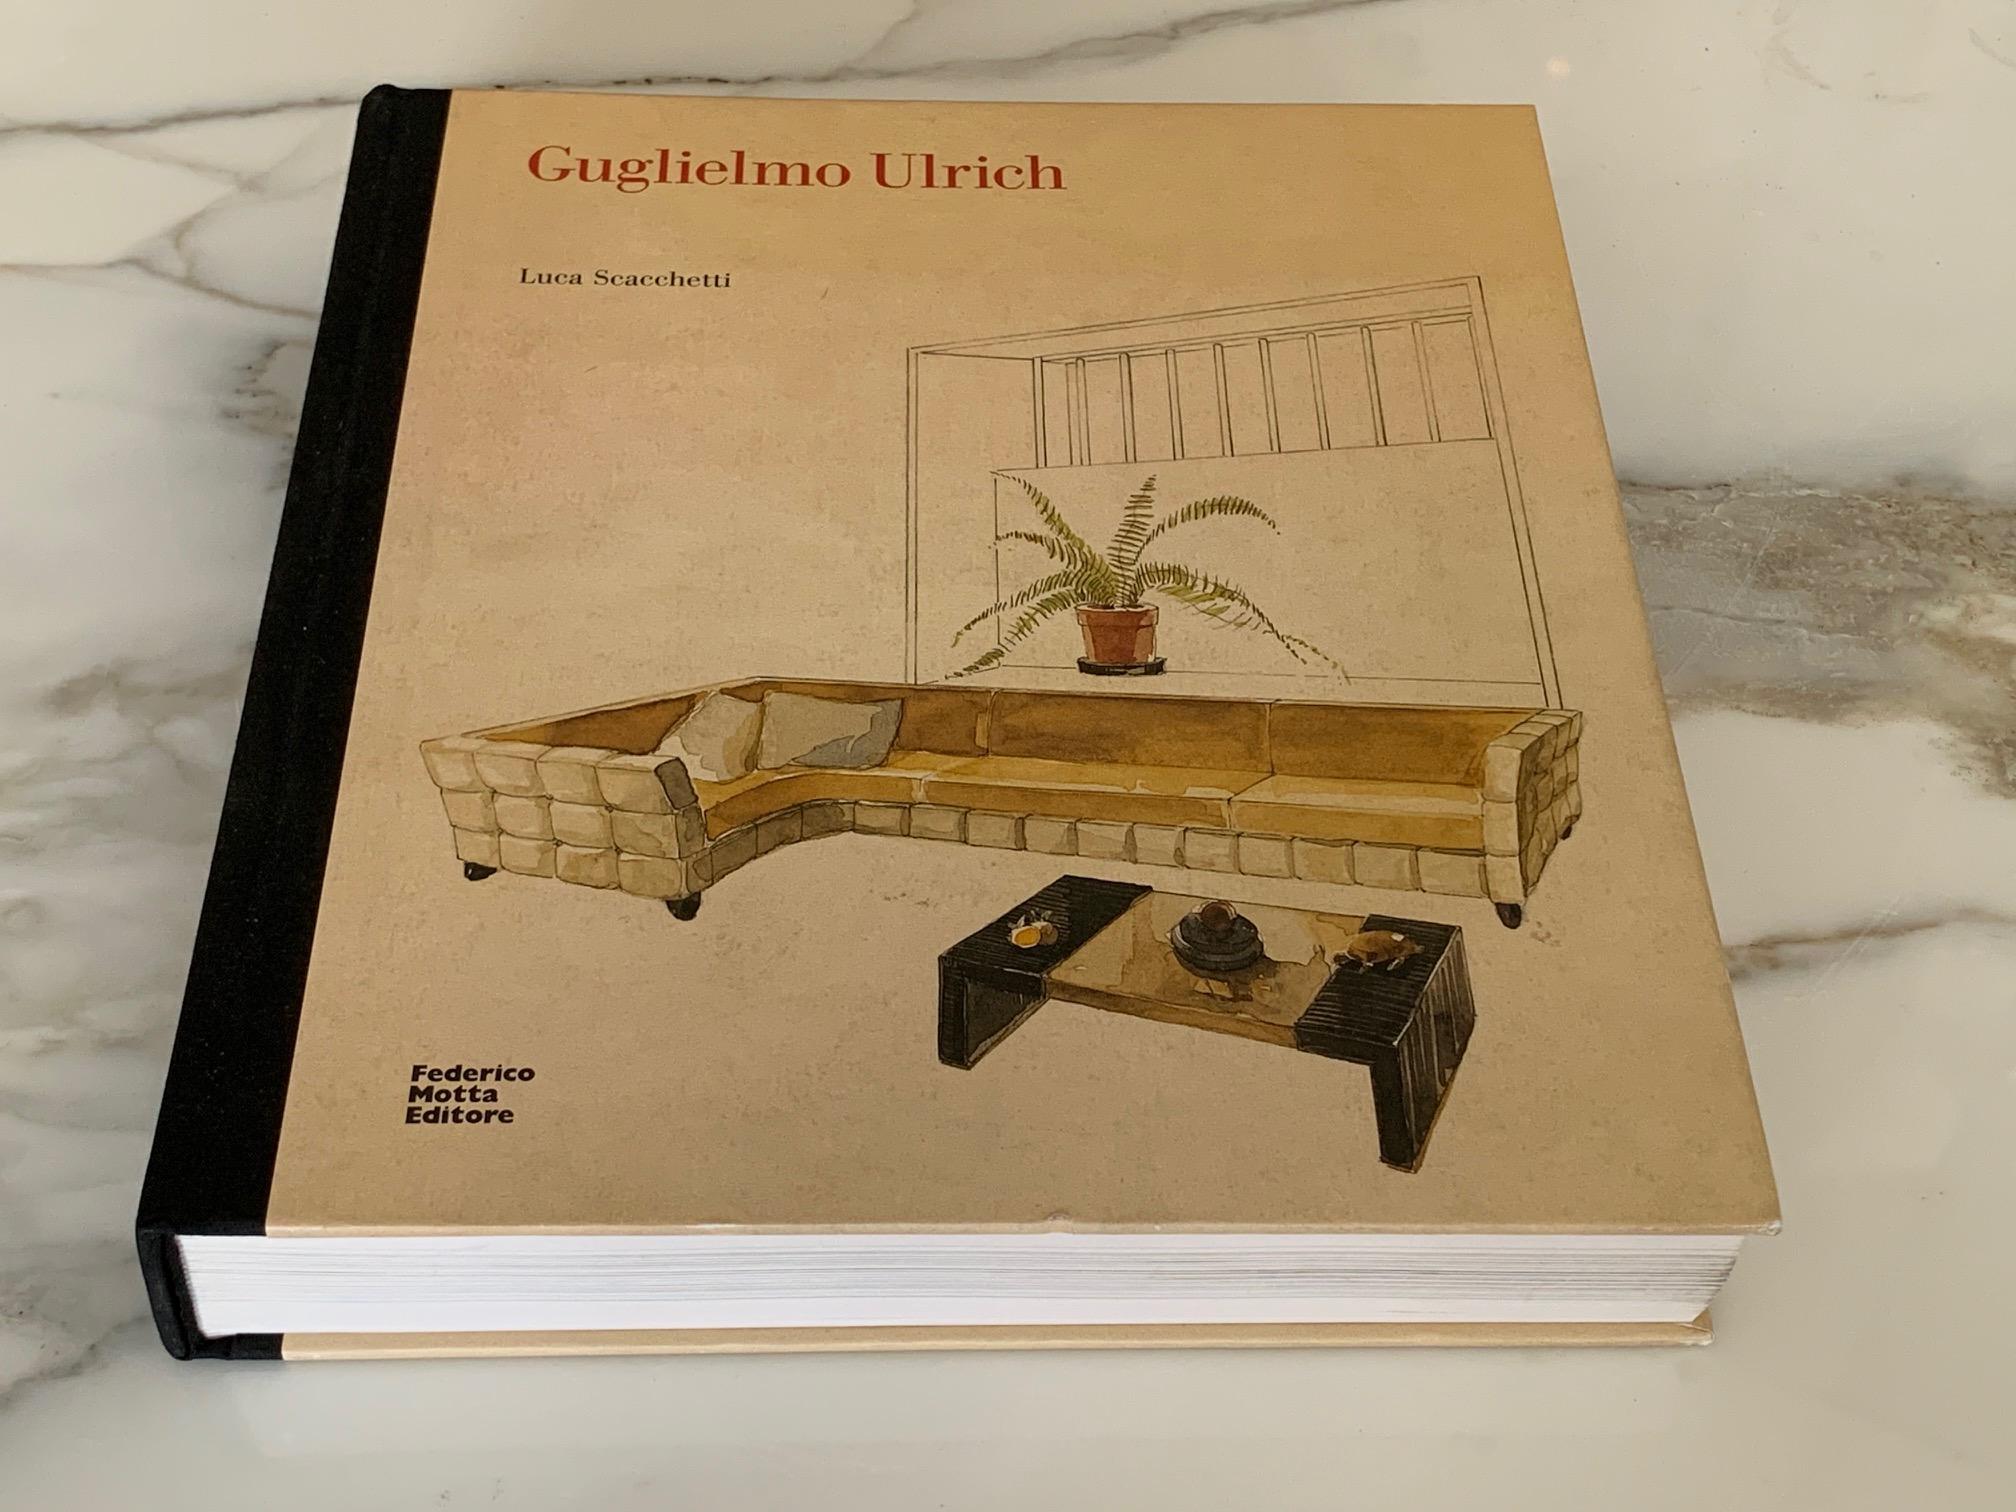 A Classic book about showcasing the work of an important Italian architect and designer Guglielmo Ulrich, published 2009, as a limited first edition, by Federico Motta. In English and Italian, approximate 509 pages this a large coffee table